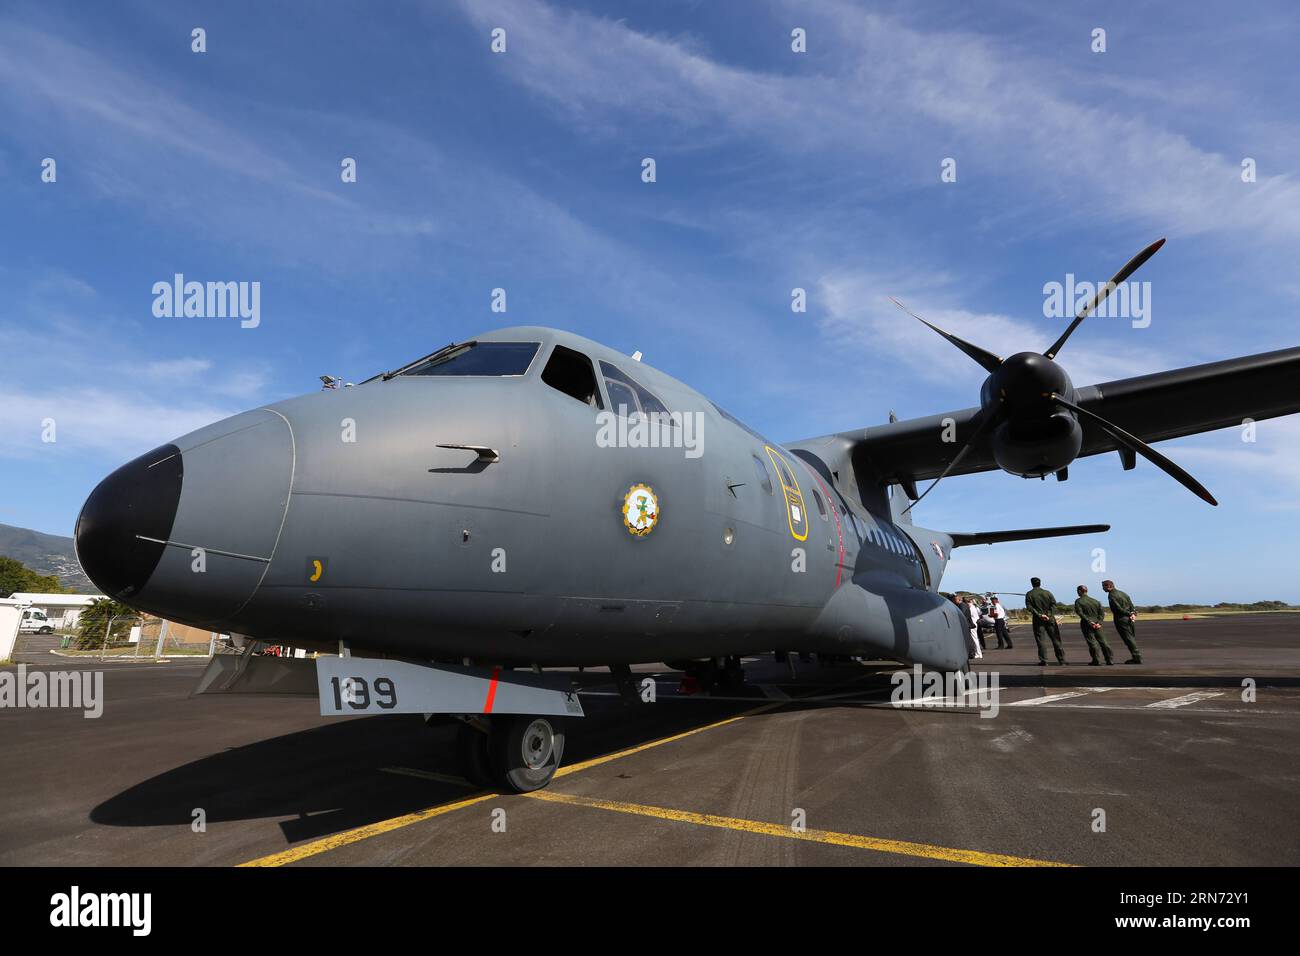 (150814) -- LA REUNION, Aug. 14, 2015 -- A CASA search plane taking part in the searching mission is seen at an airport in Saint Denis, La Reunion, Aug. 14, 2015. The administrator of Reunion Island Dominique Sorain told the media on Friday the active search for more MH370 debris will continue until Monday. No debris related to the plane has been found in the sea during the 35 hours of a combined search by a CASA search plane of French army and three helicopters, he said. ) (djj) LA REUNION-MH370 DEBRIS-SEARCH PanxSiwei PUBLICATIONxNOTxINxCHN   150814 La Reunion Aug 14 2015 a Casa Search Plane Stock Photo